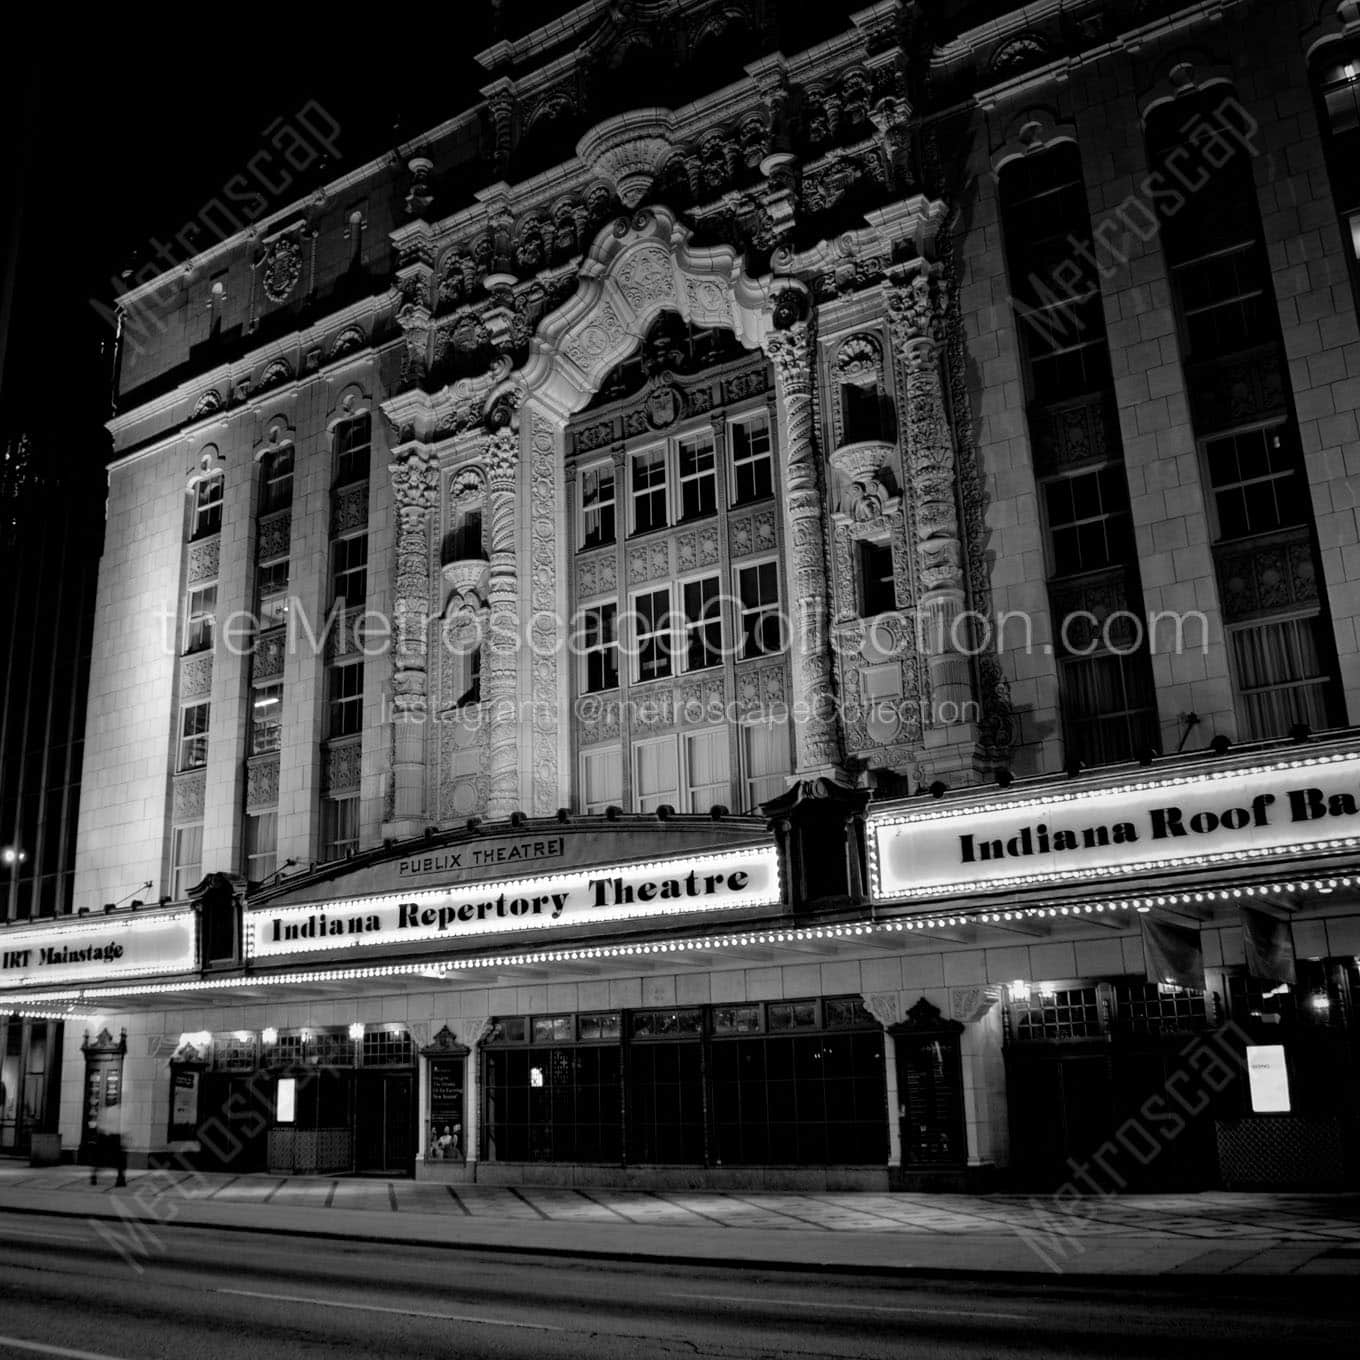 publix theater at night Black & White Office Art